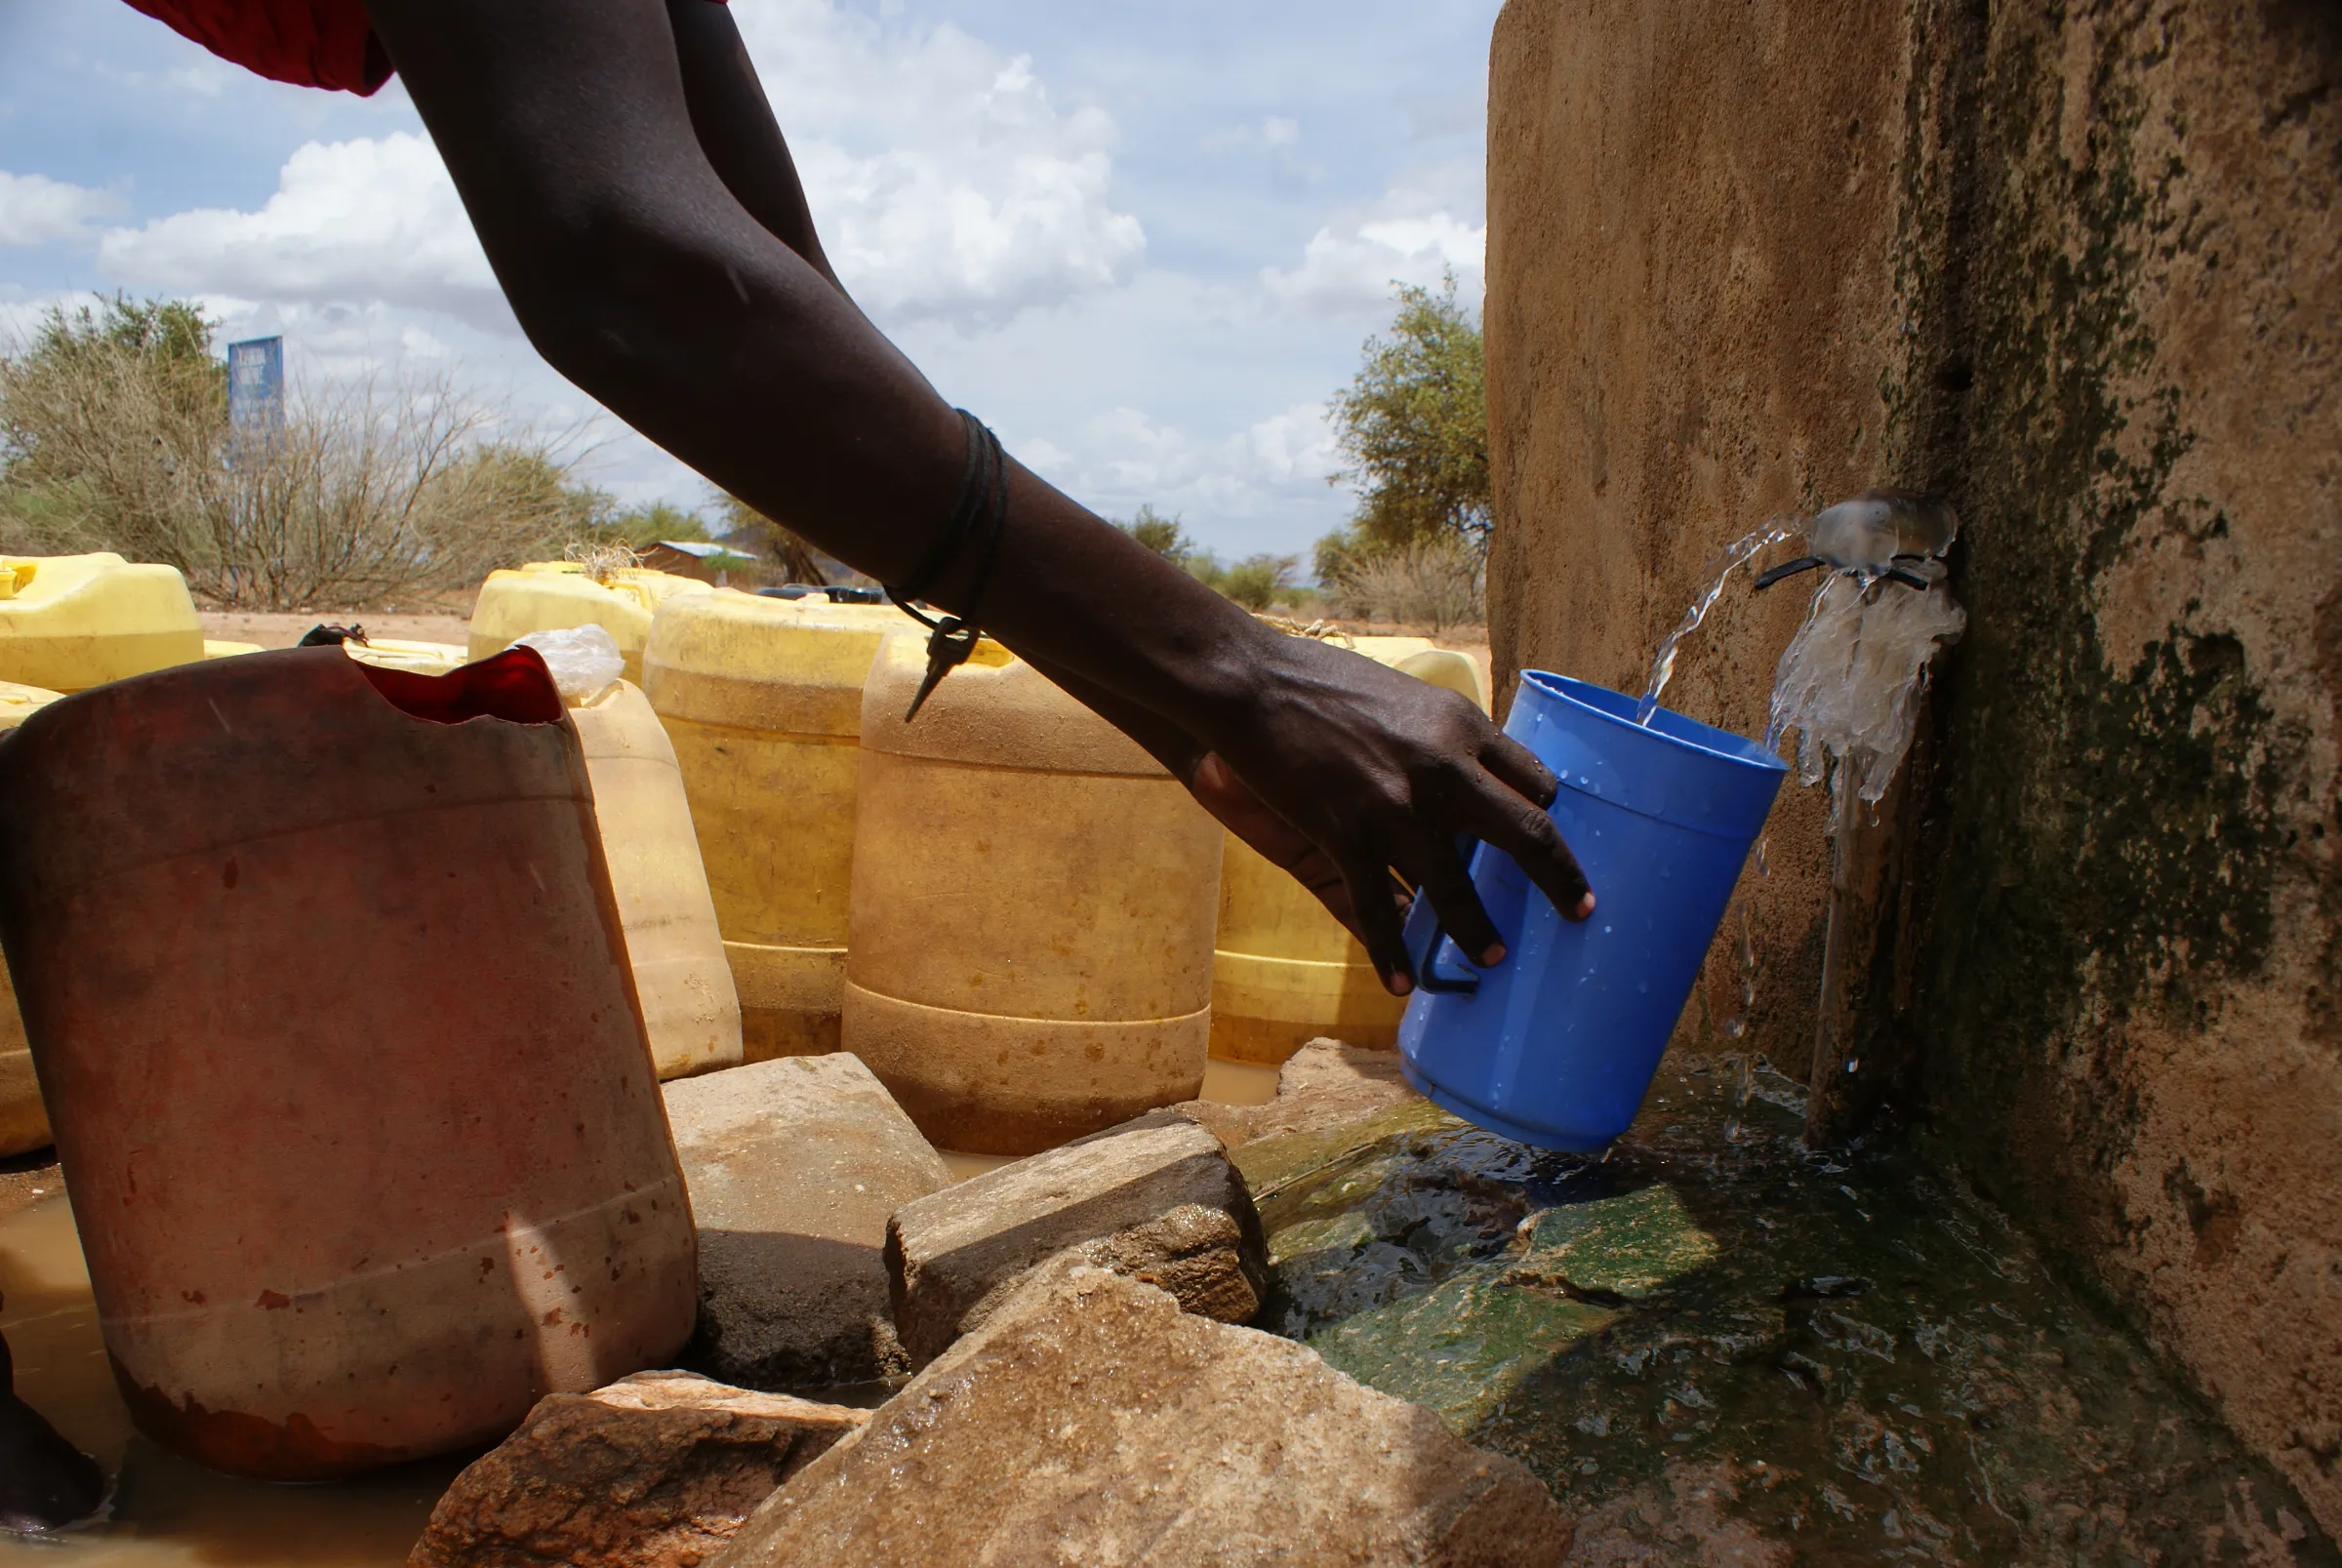 A resident fetches water at a tap built into a wall